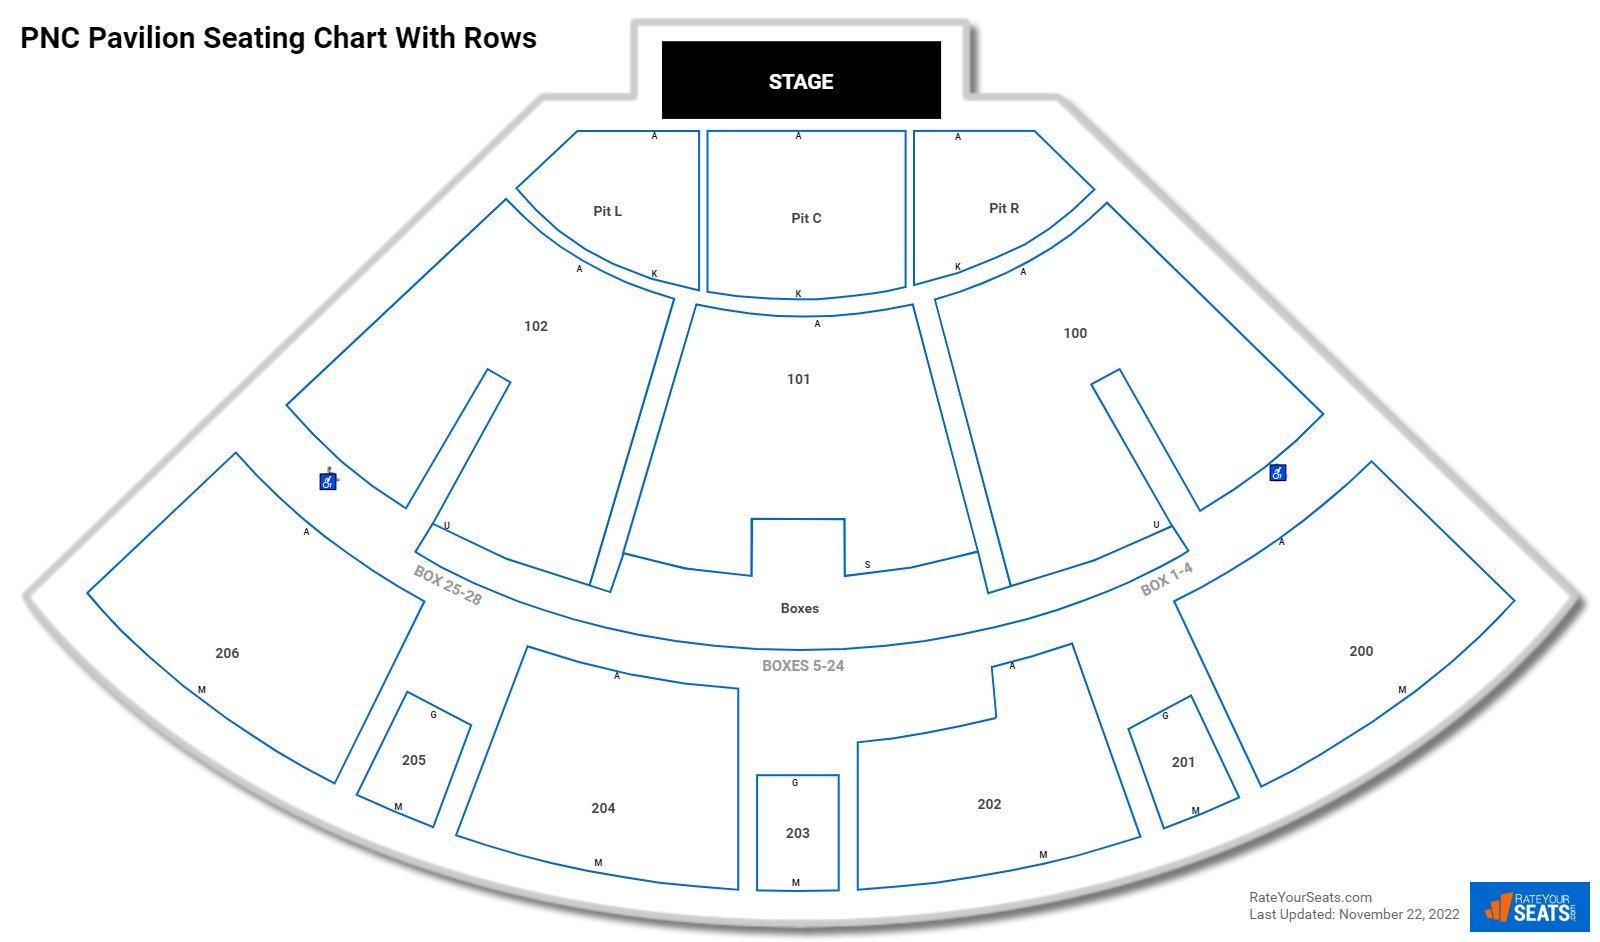 PNC Pavilion seating chart with row numbers